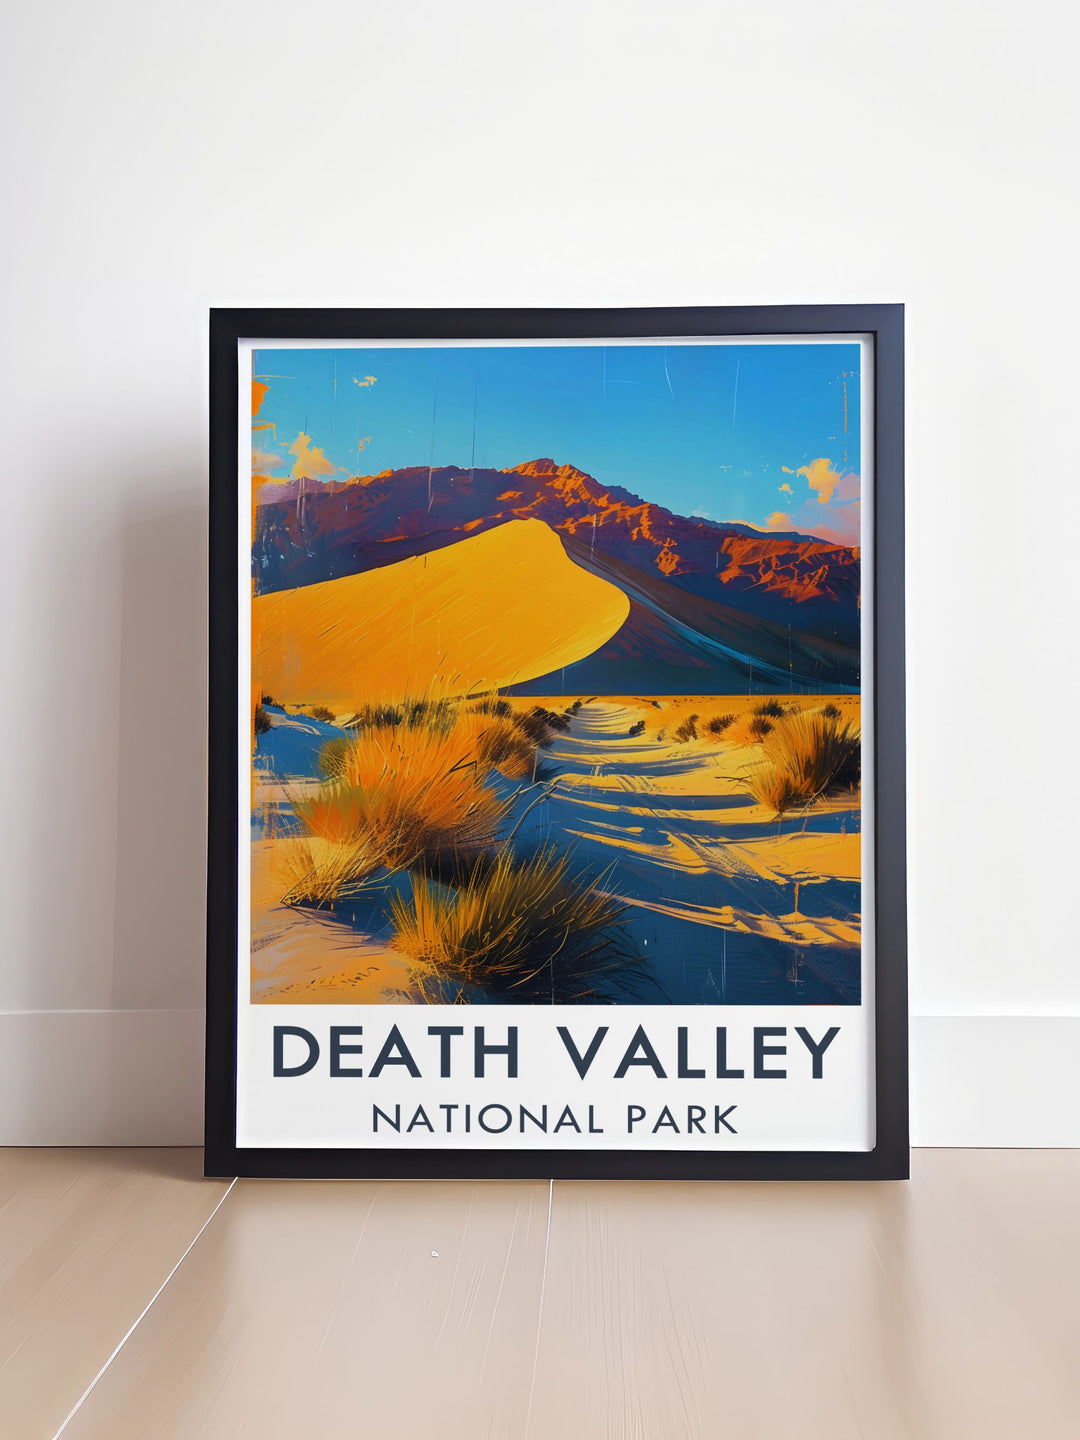 Travel poster featuring the Mesquite Flat Sand Dunes in Death Valley, highlighting the rolling sand dunes and dramatic vistas of the park, ideal for adding a touch of desert beauty to your decor.